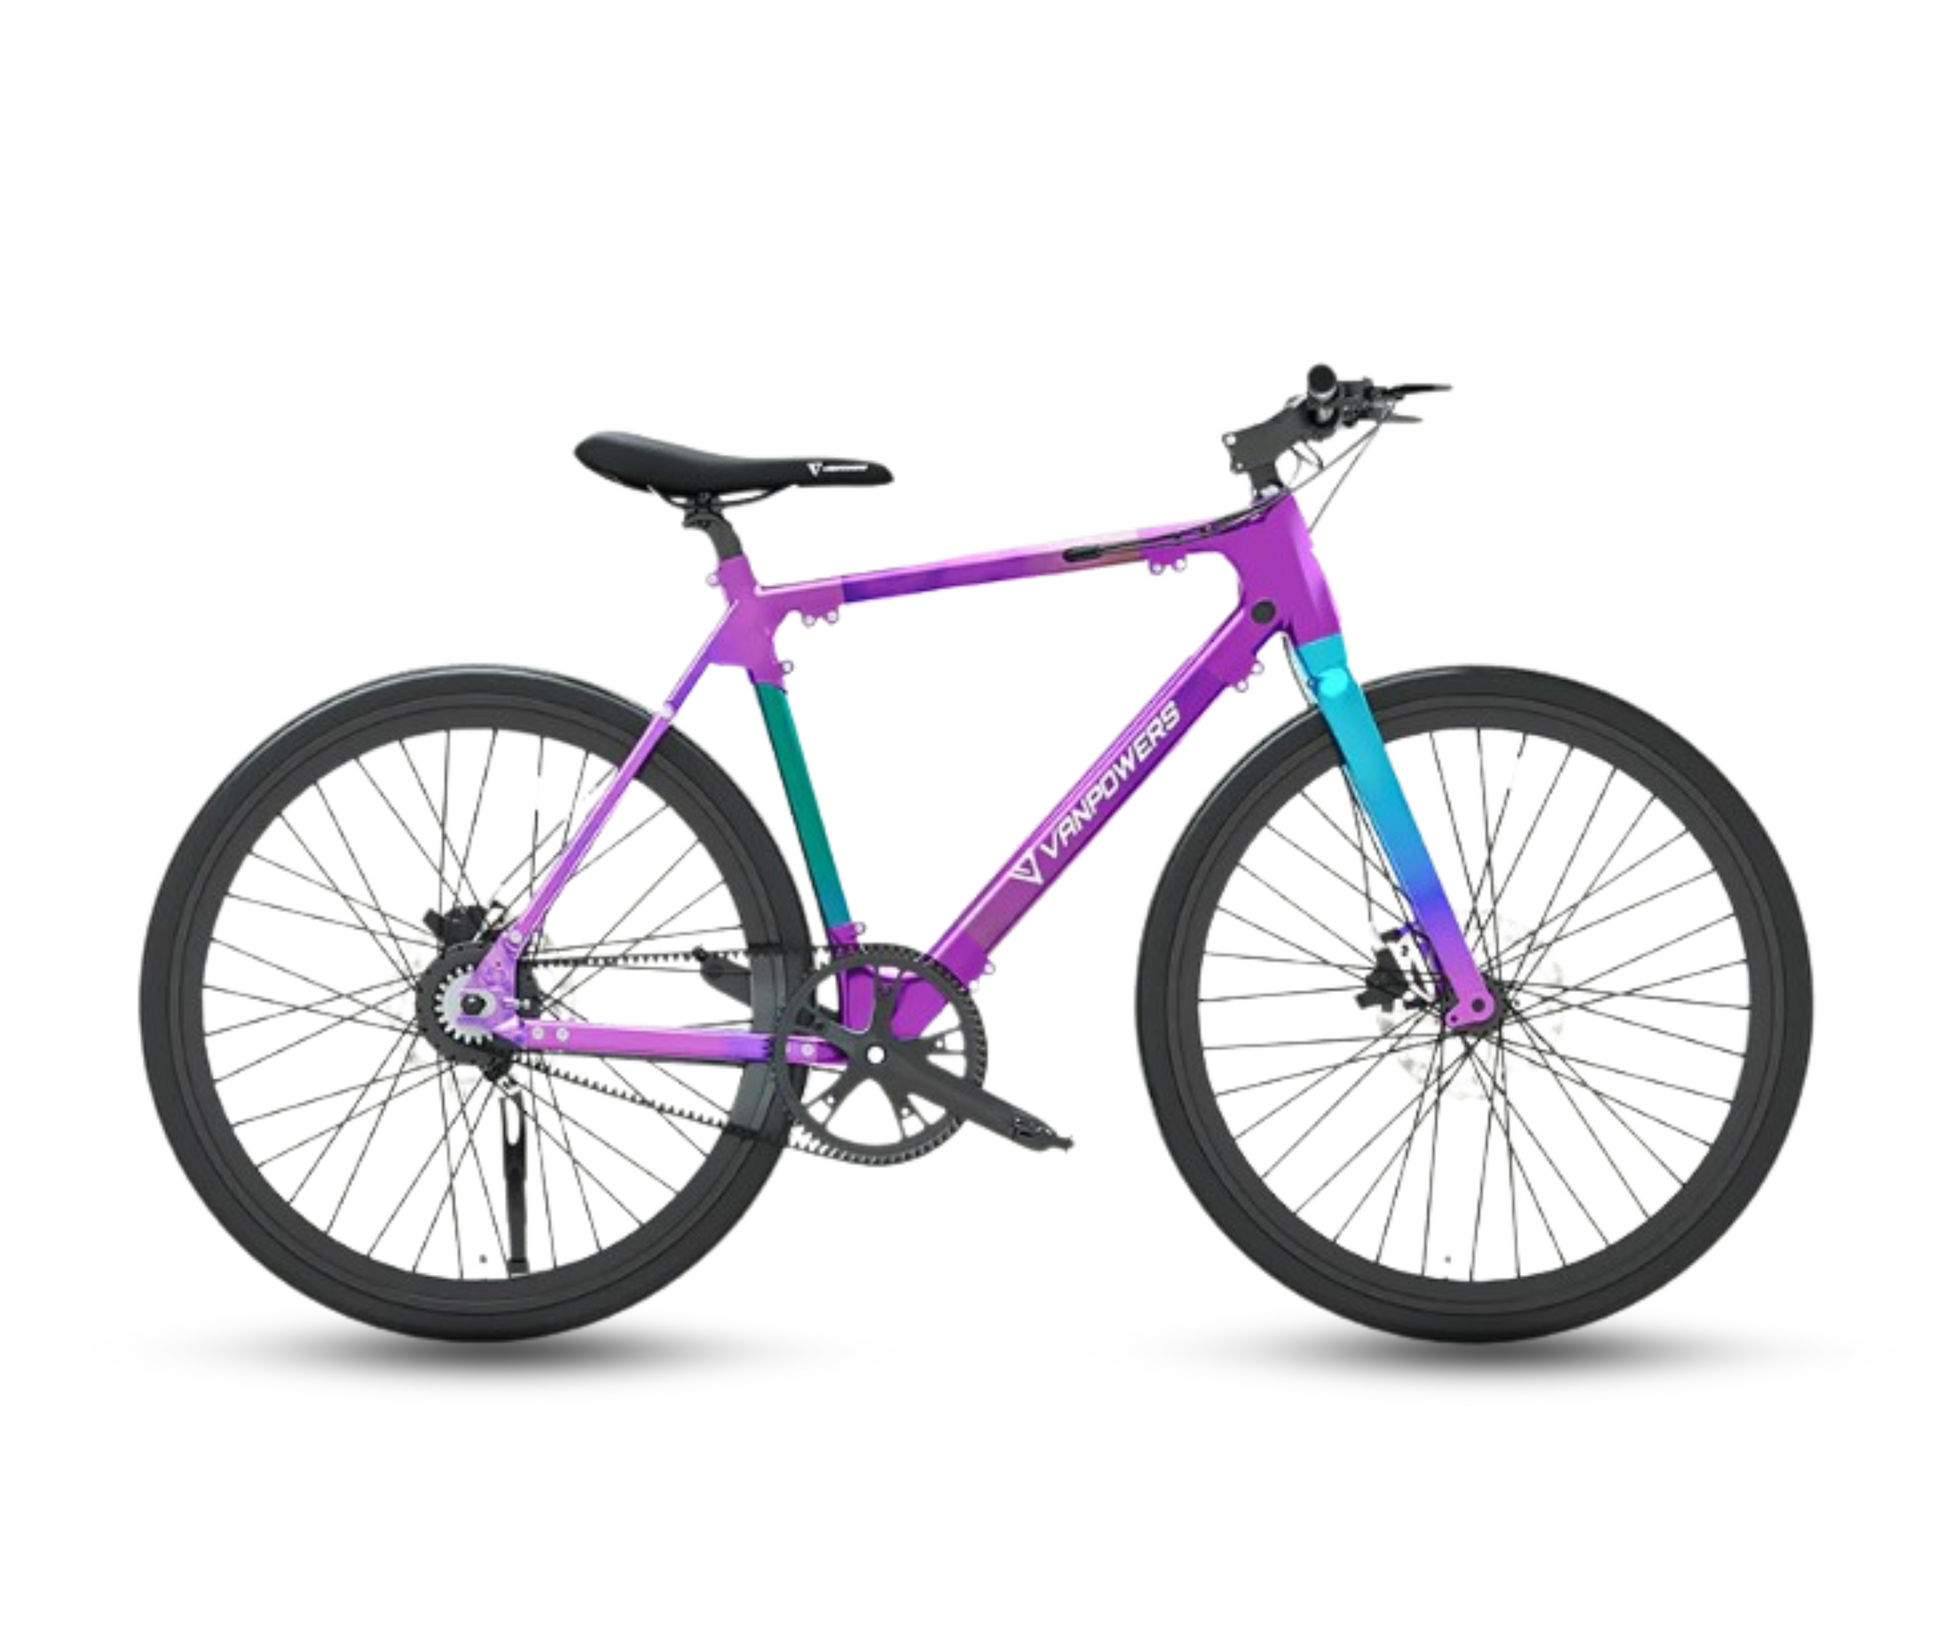 Vibrant purple and blue VANPOWER City Vanture electric bicycle with a modern design.